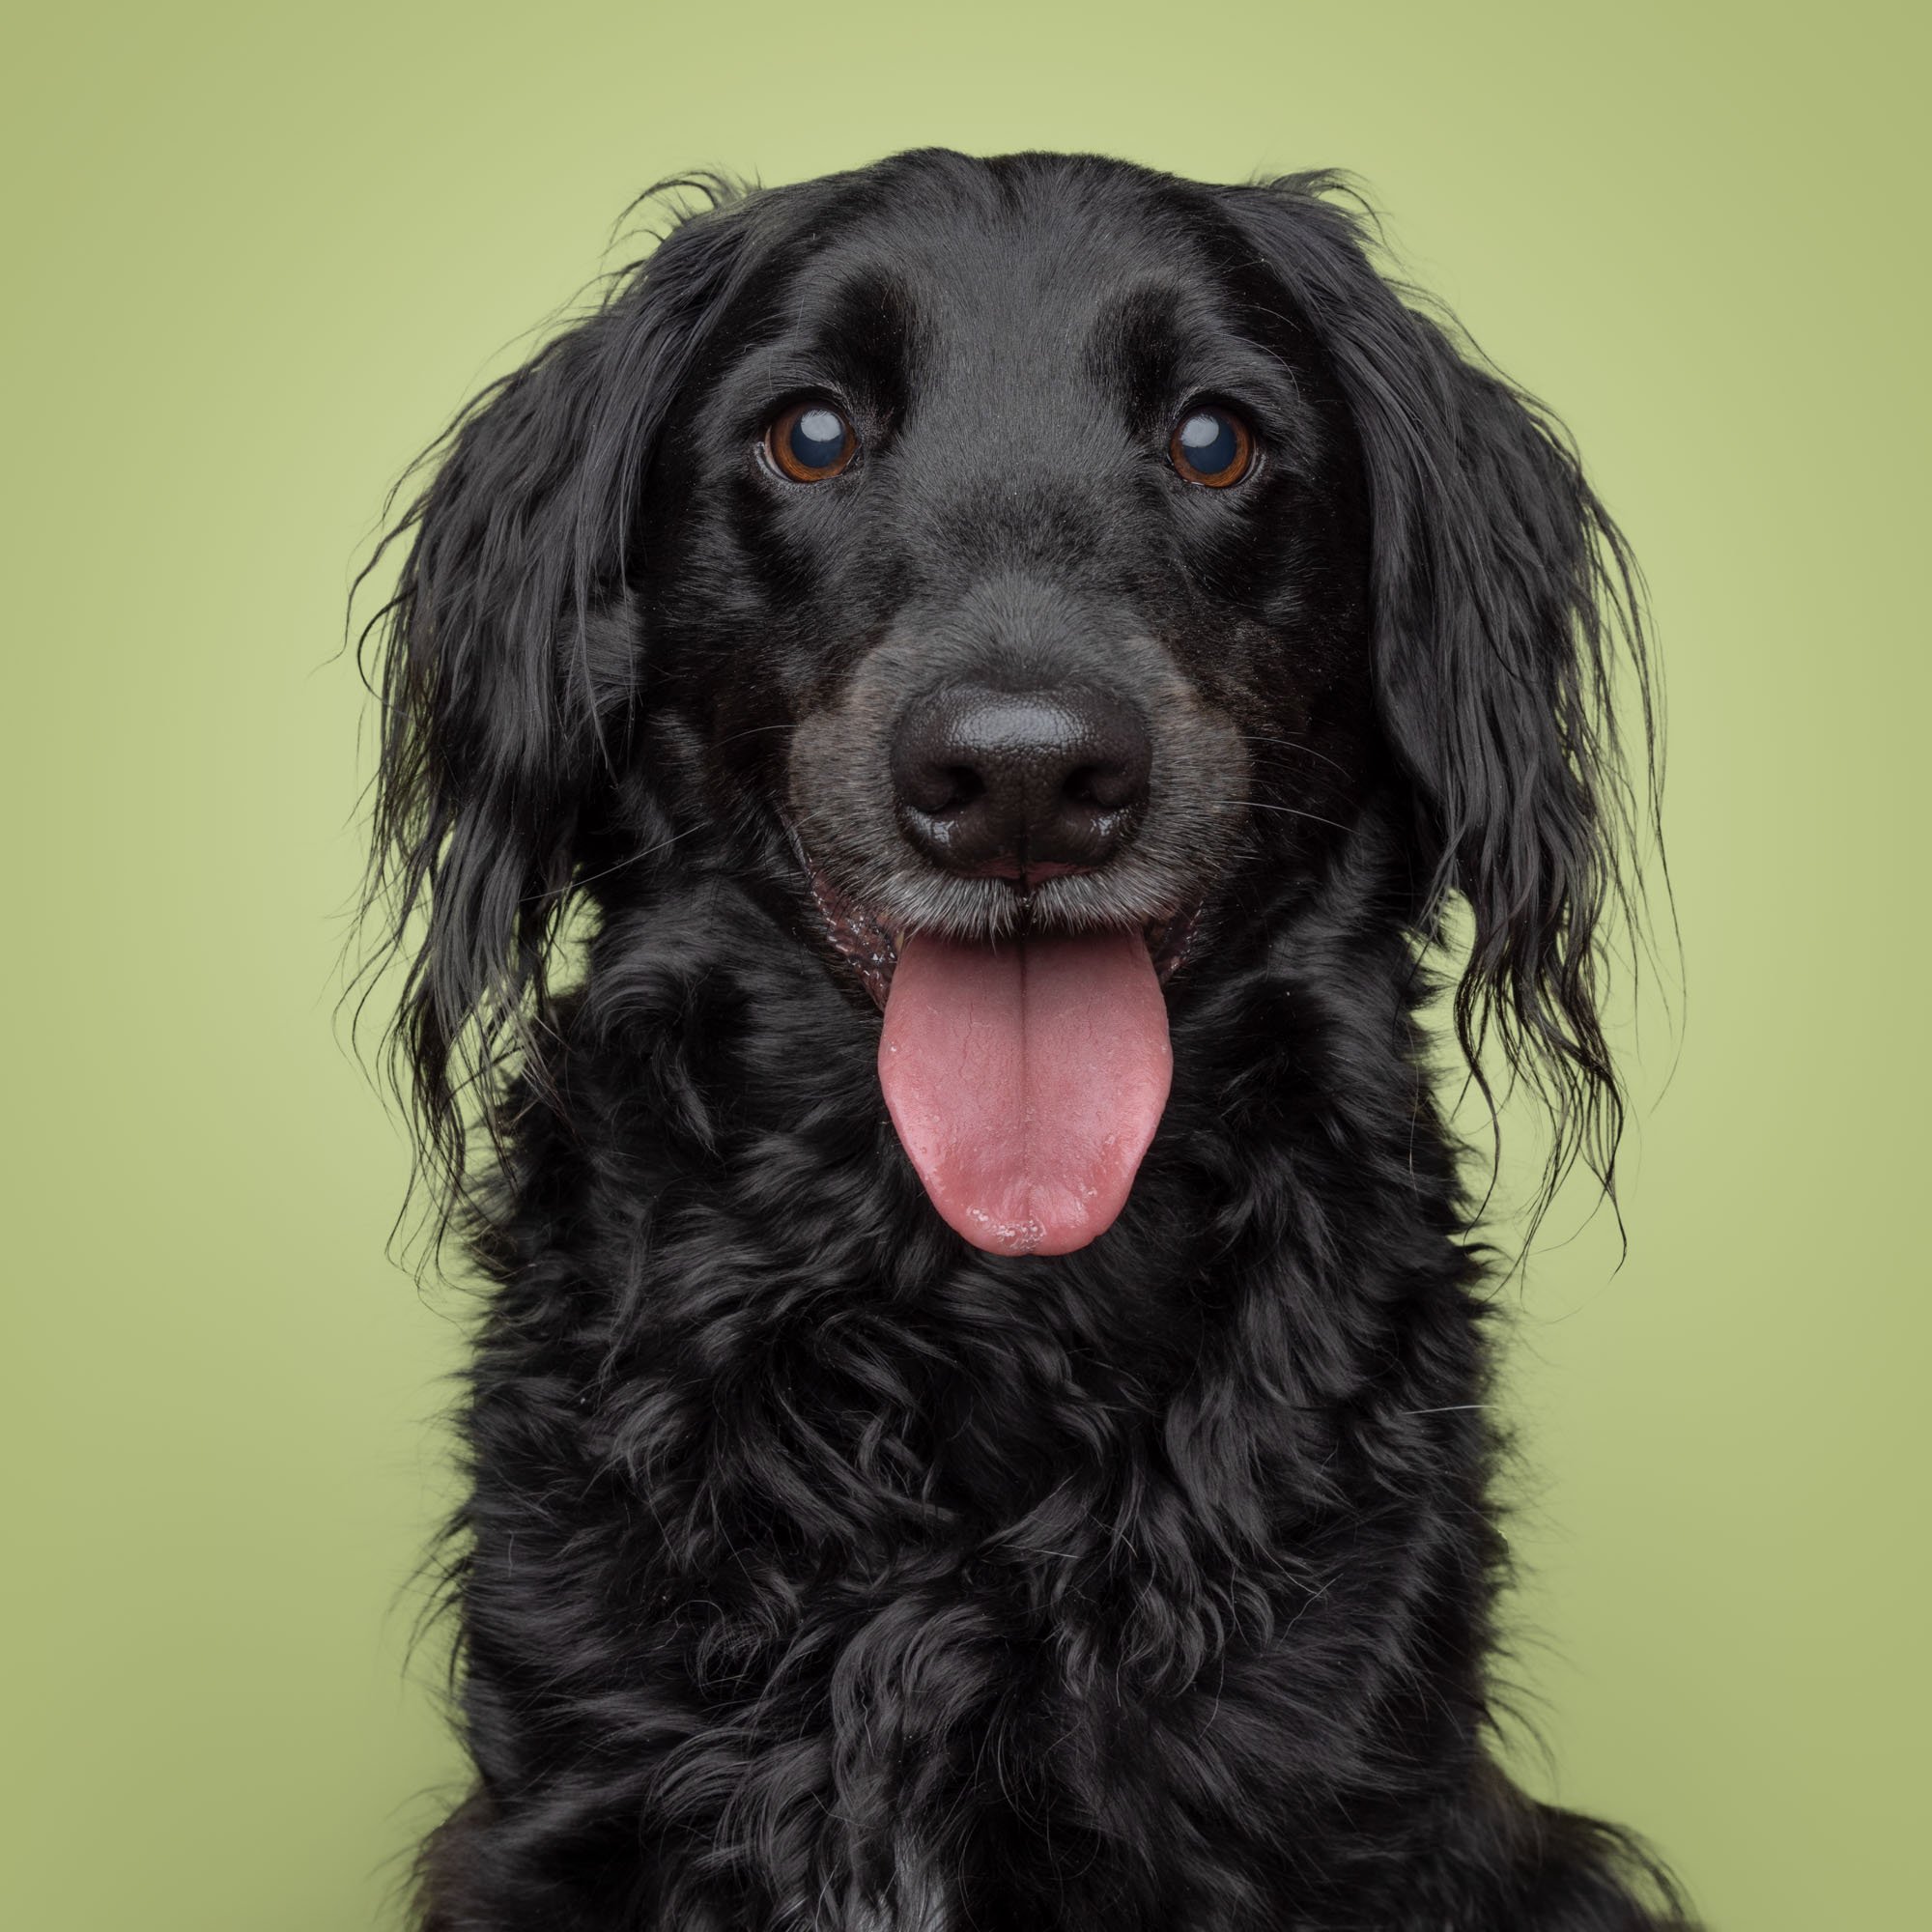 Greg Murray Photography | Pet and Animal Stock Photography | studio portrait of black mixed breed dog smiling against green backdrop.jpg